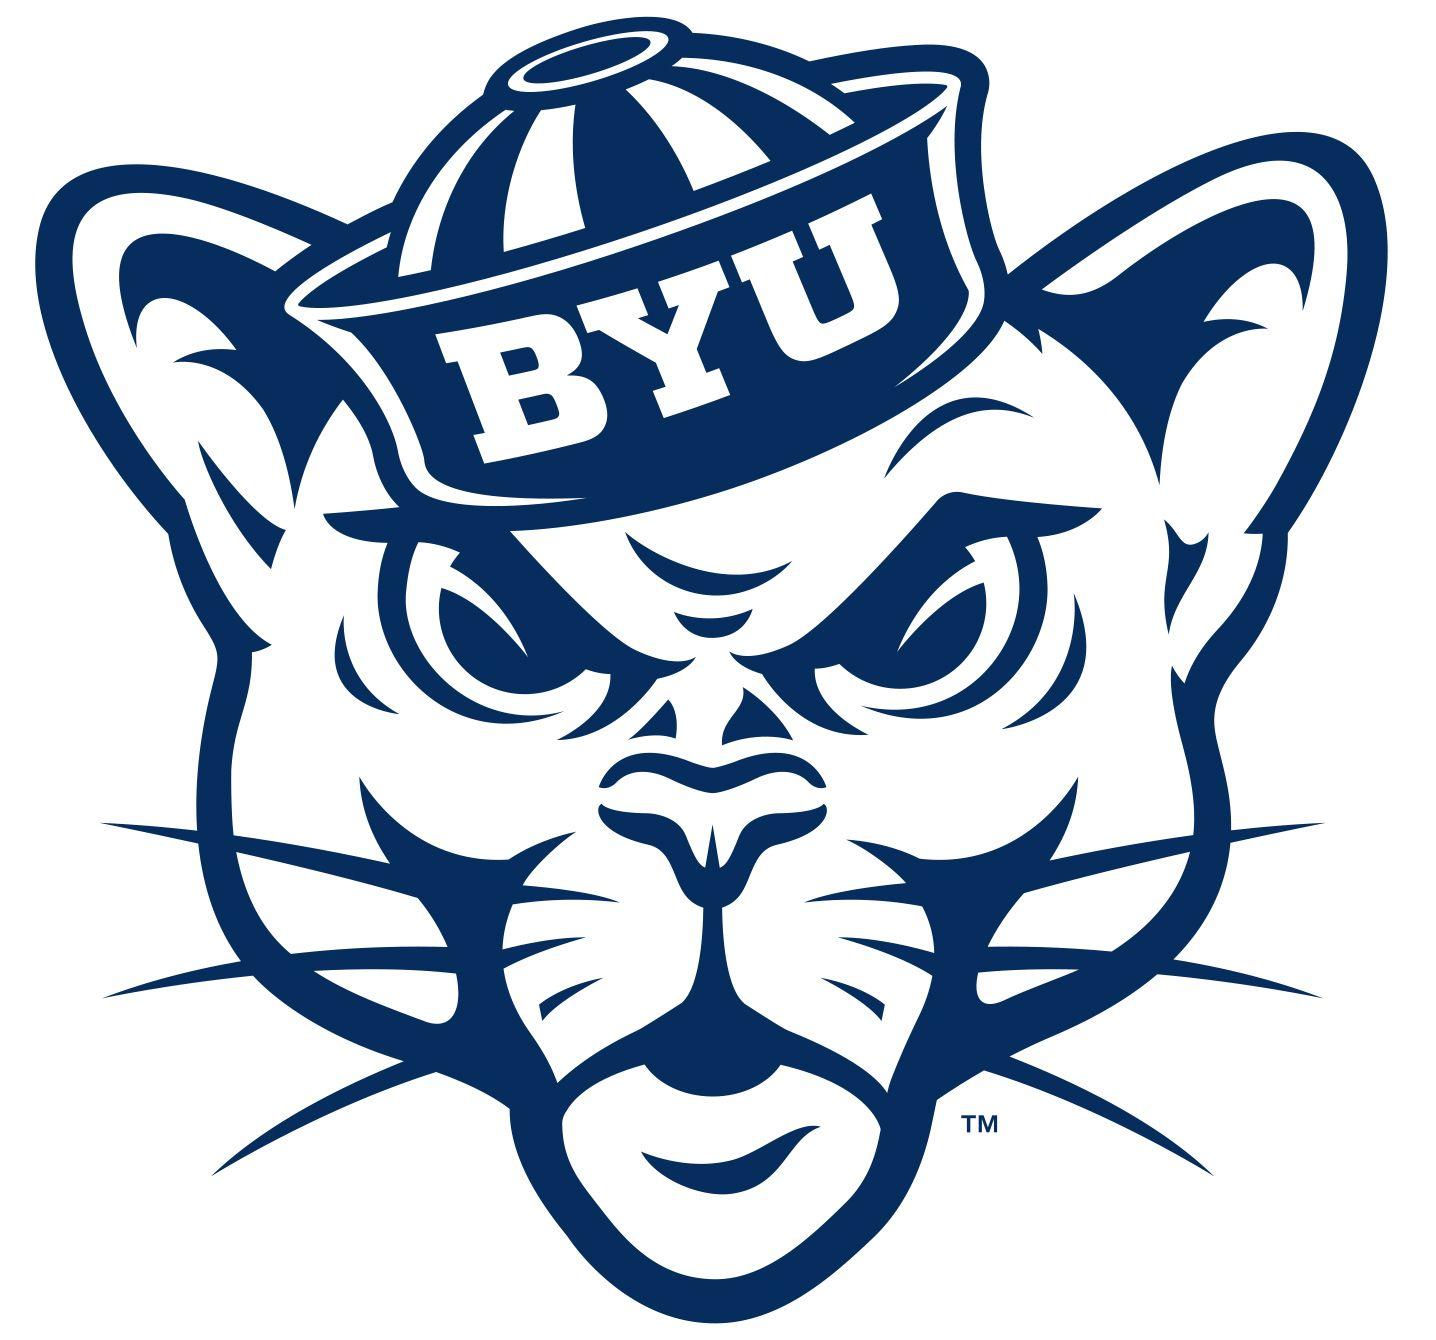 BYU Football Logo - Secondary 'sailor cougar' logo reinforces BYU's tradition and ...